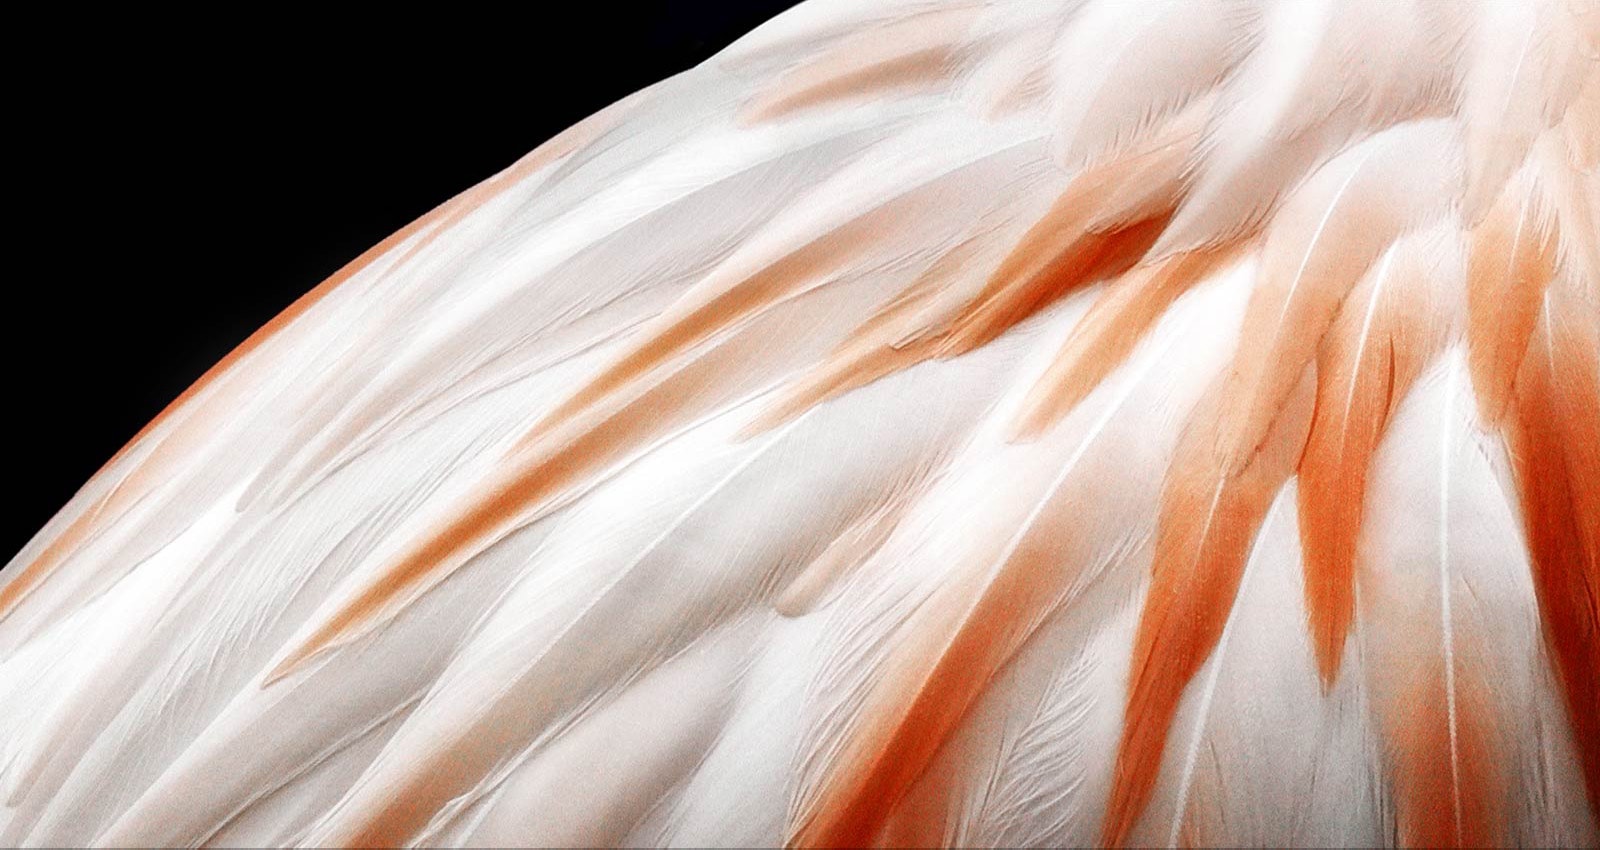 A video showing 2 images of a bird's feathers side by side. The side representing Brightness Booster appears brighter and then fills the screen. 